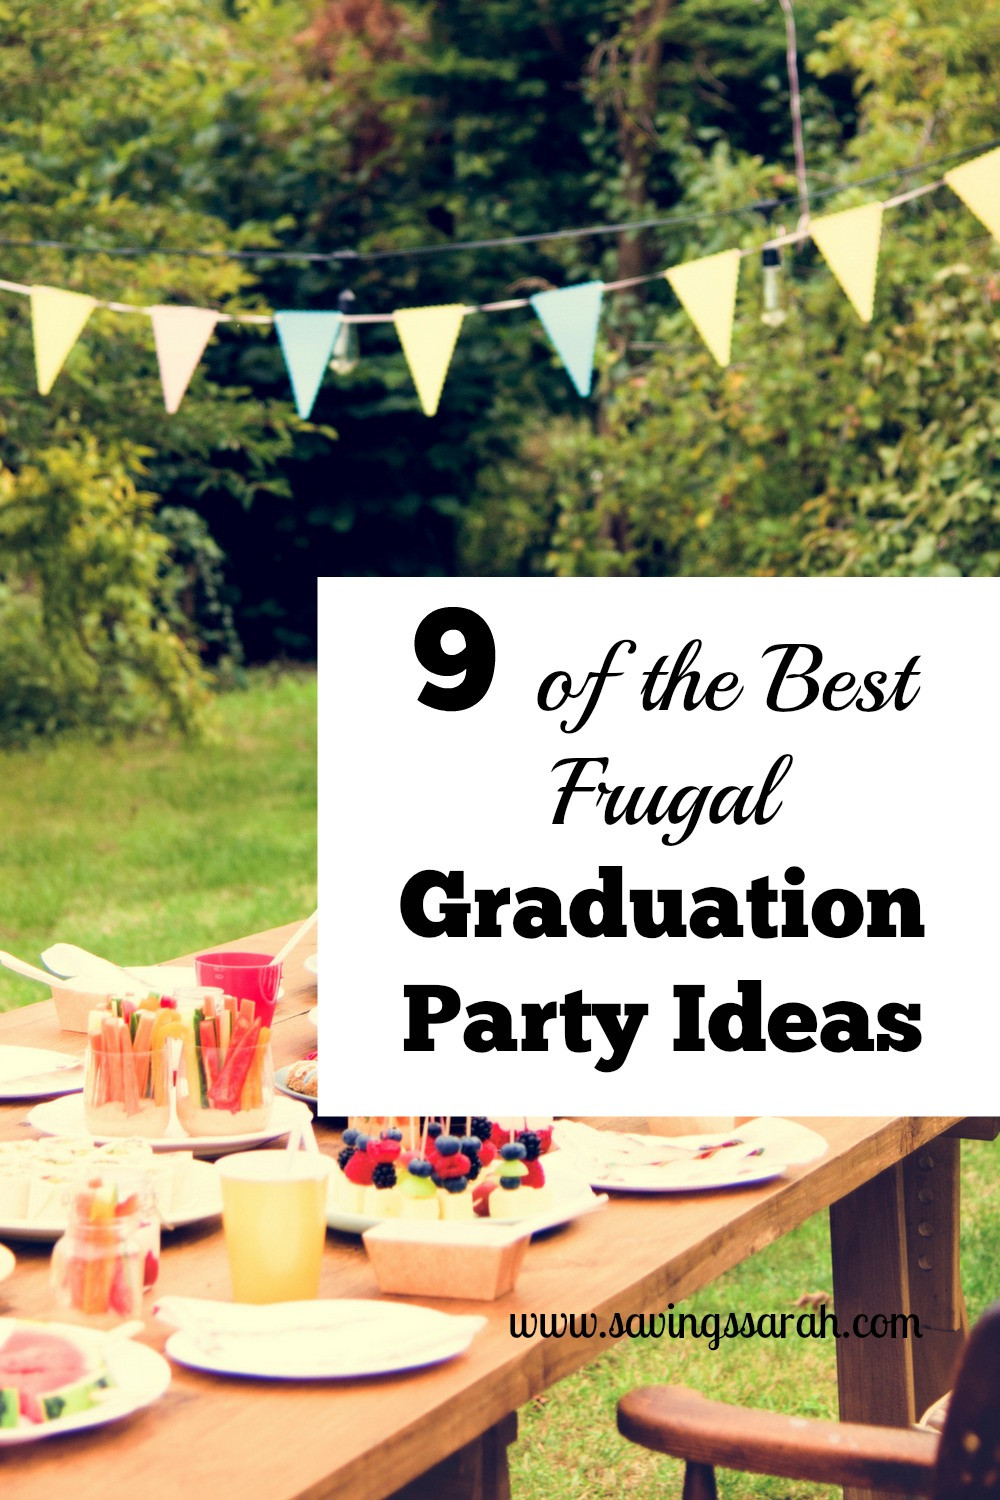 Graduation Party Celebration Ideas
 9 the Best Frugal Graduation Party Ideas Earning and